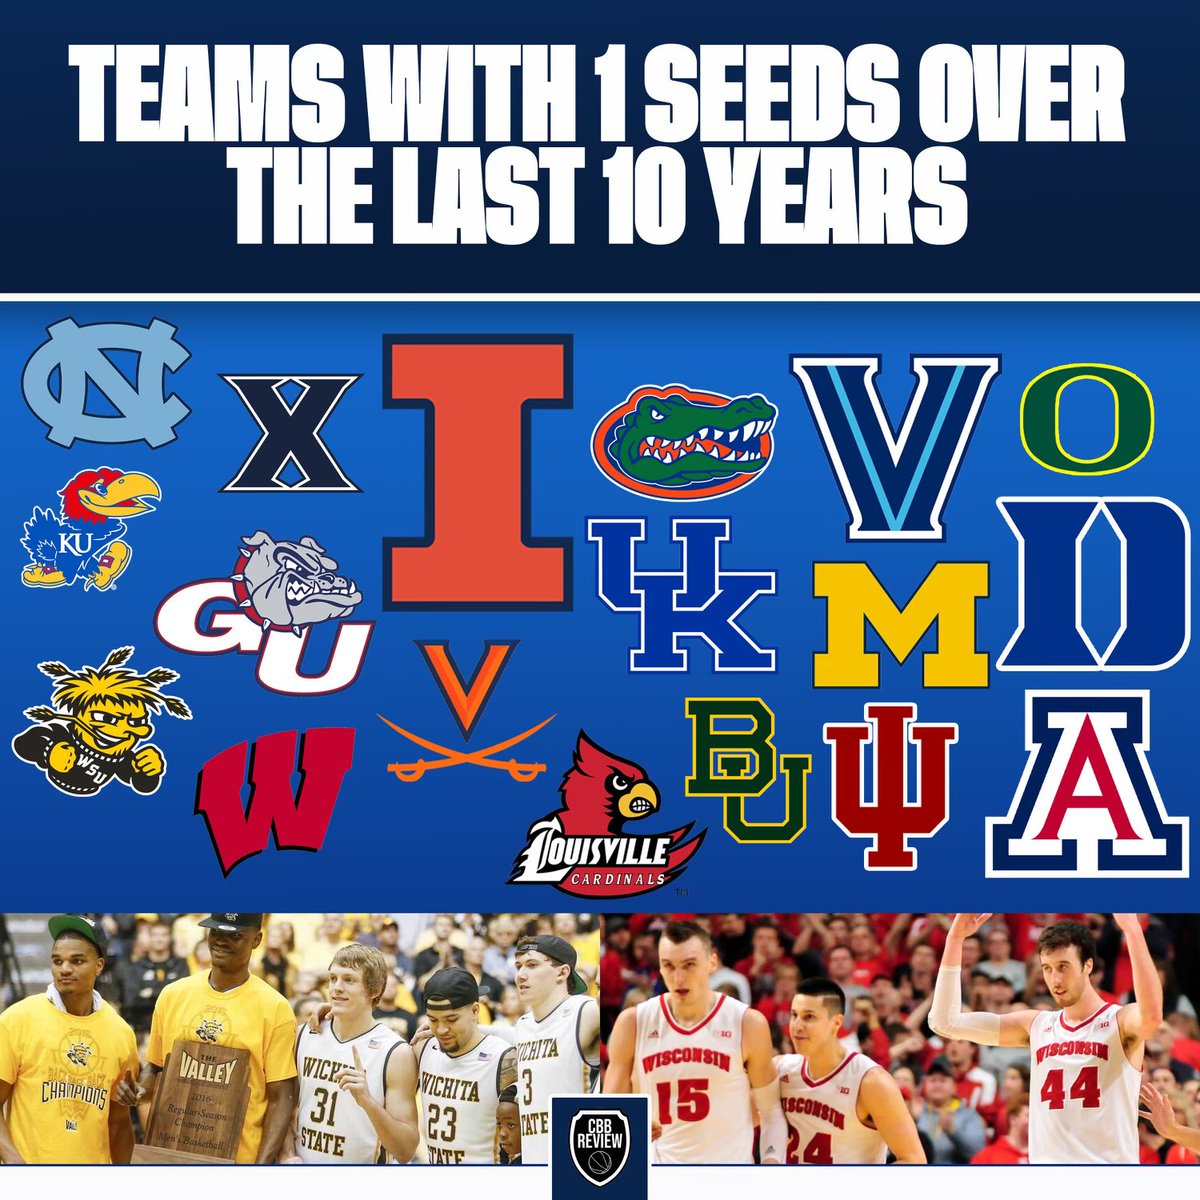 Getting a one-seed isn’t too easy!